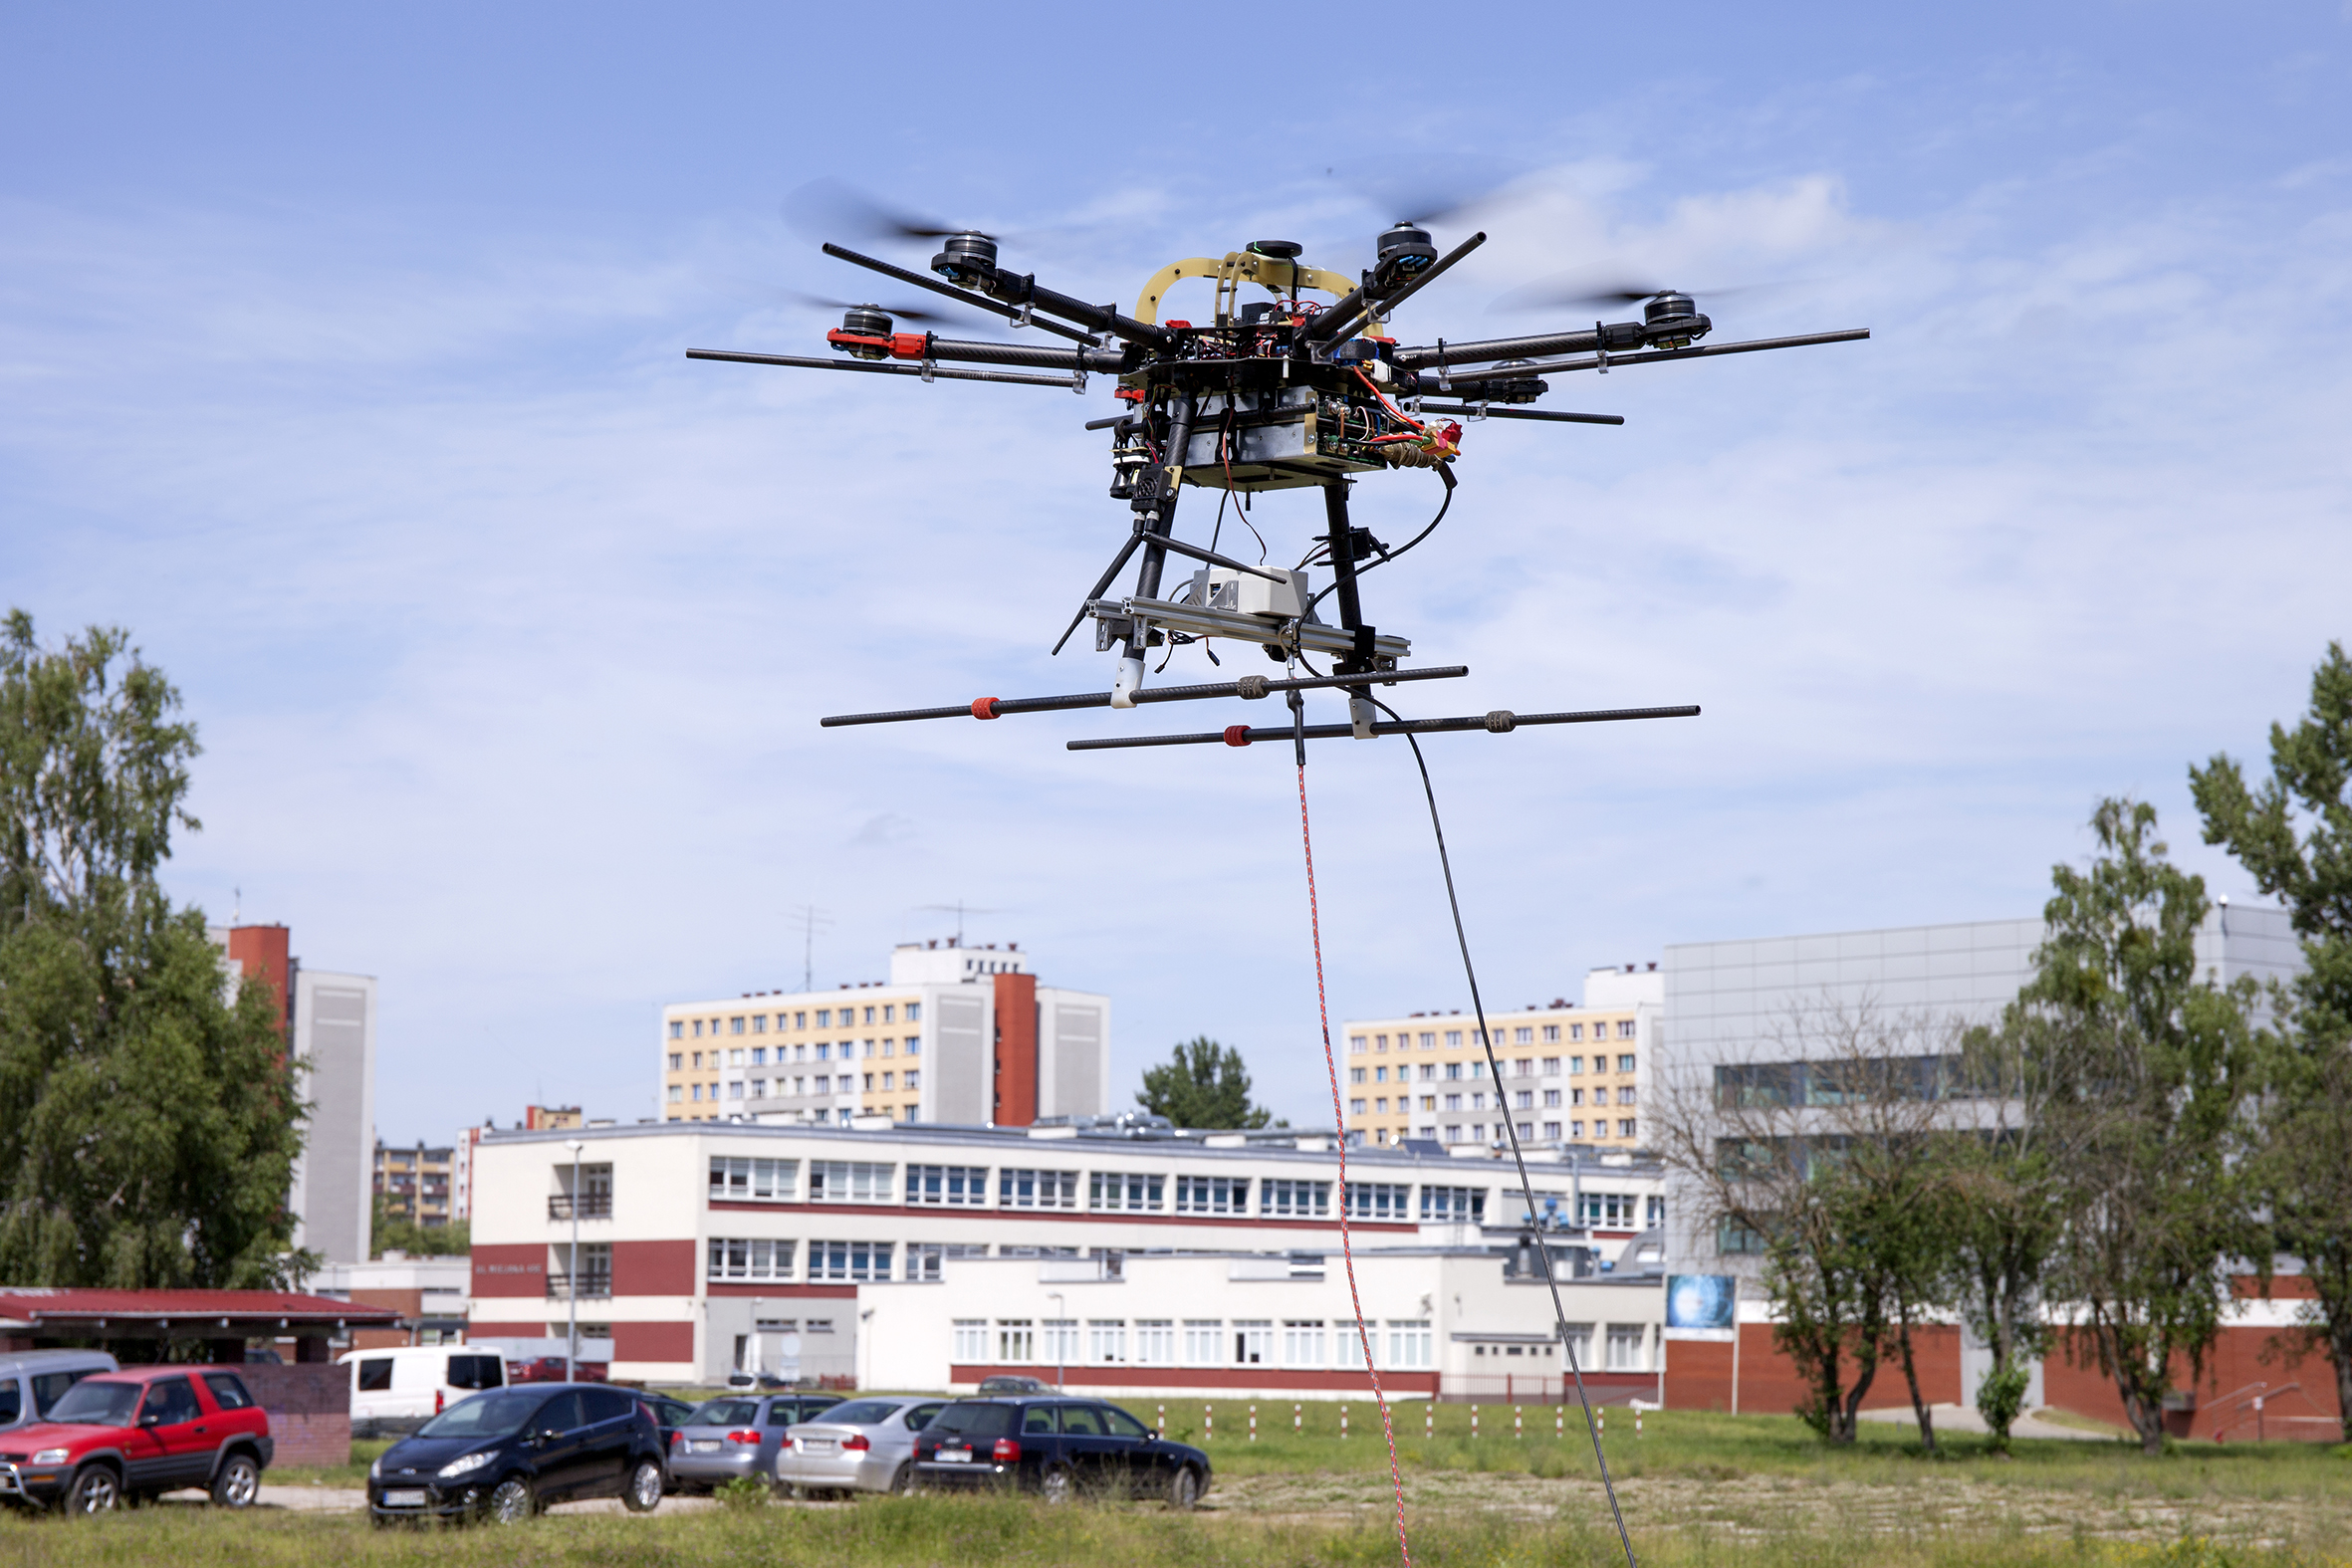 Tests of AVAL system components carried out at the Białystok University of Technology. In the center of the photo, you can see a drone rising above the meadow and a parking lot near the university campus